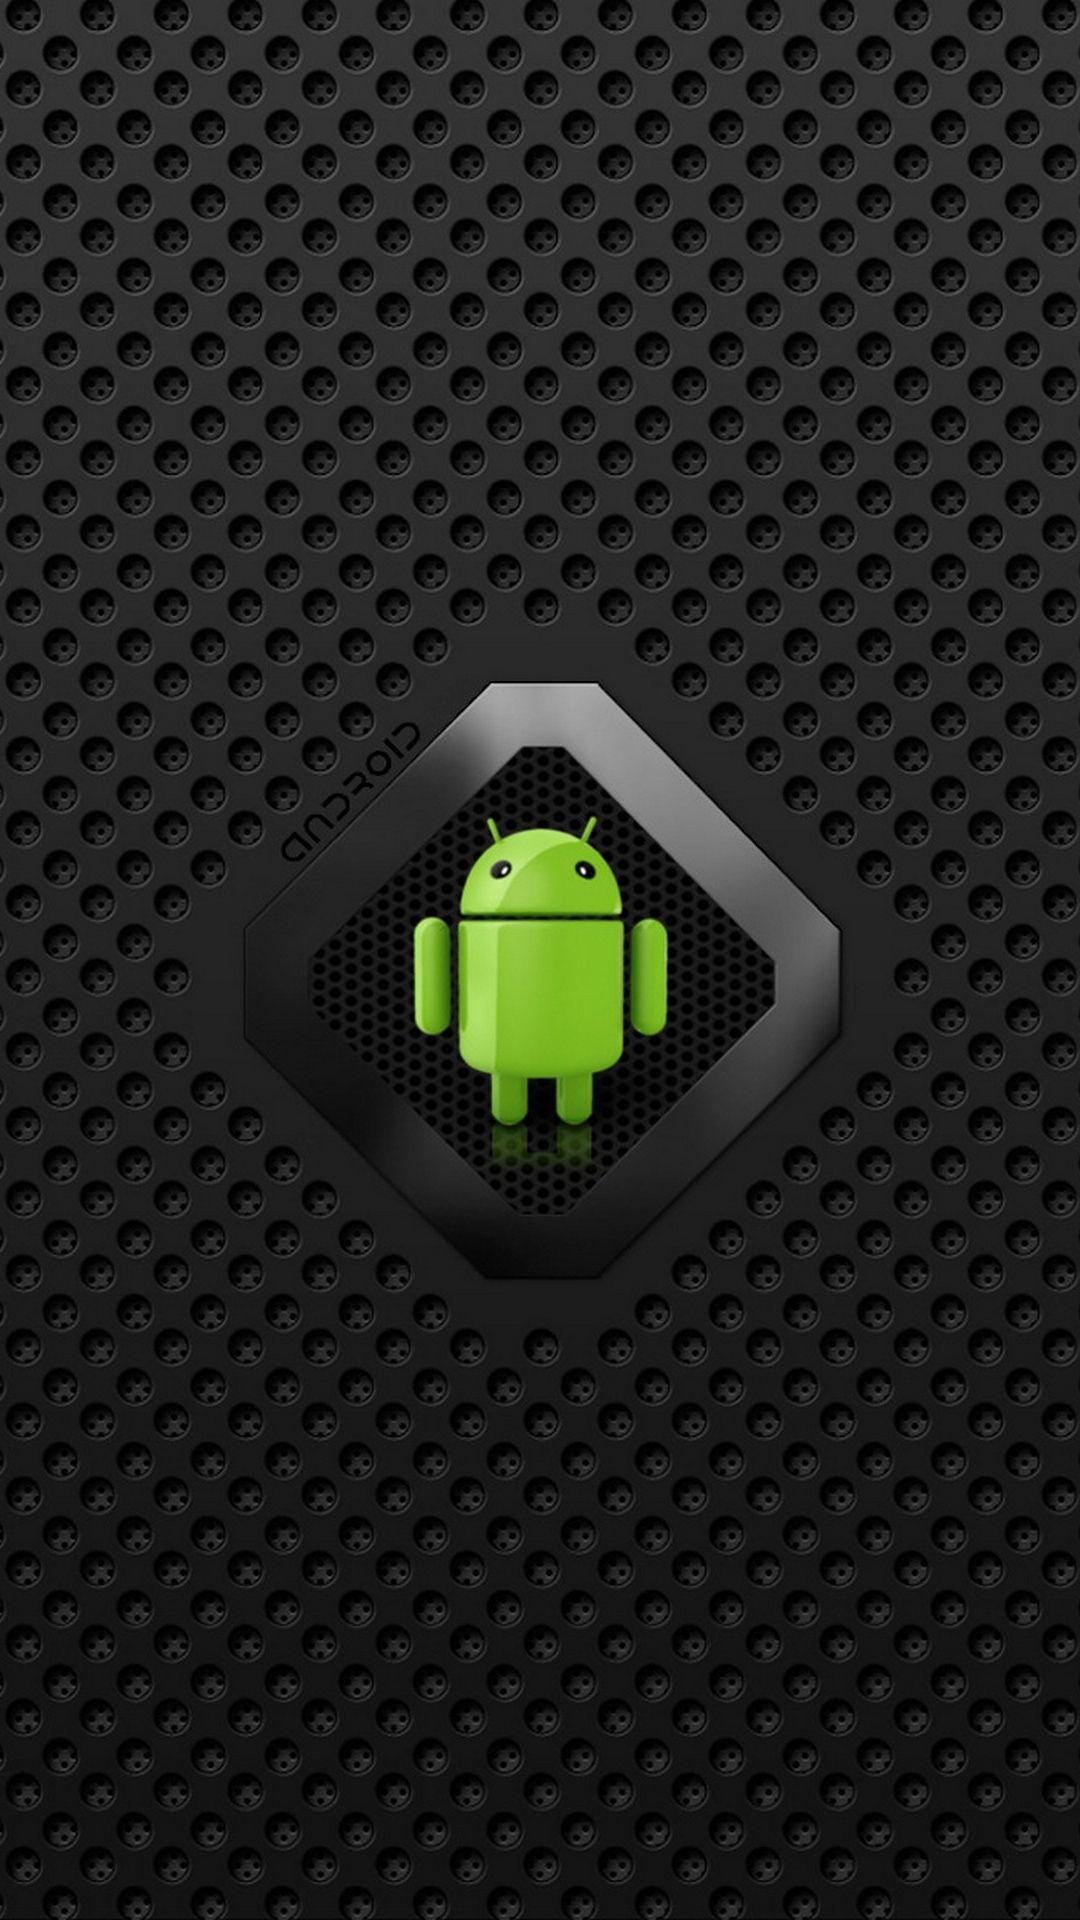 Android Logo On Carbon Dot Pattern Android Wallpaper free download